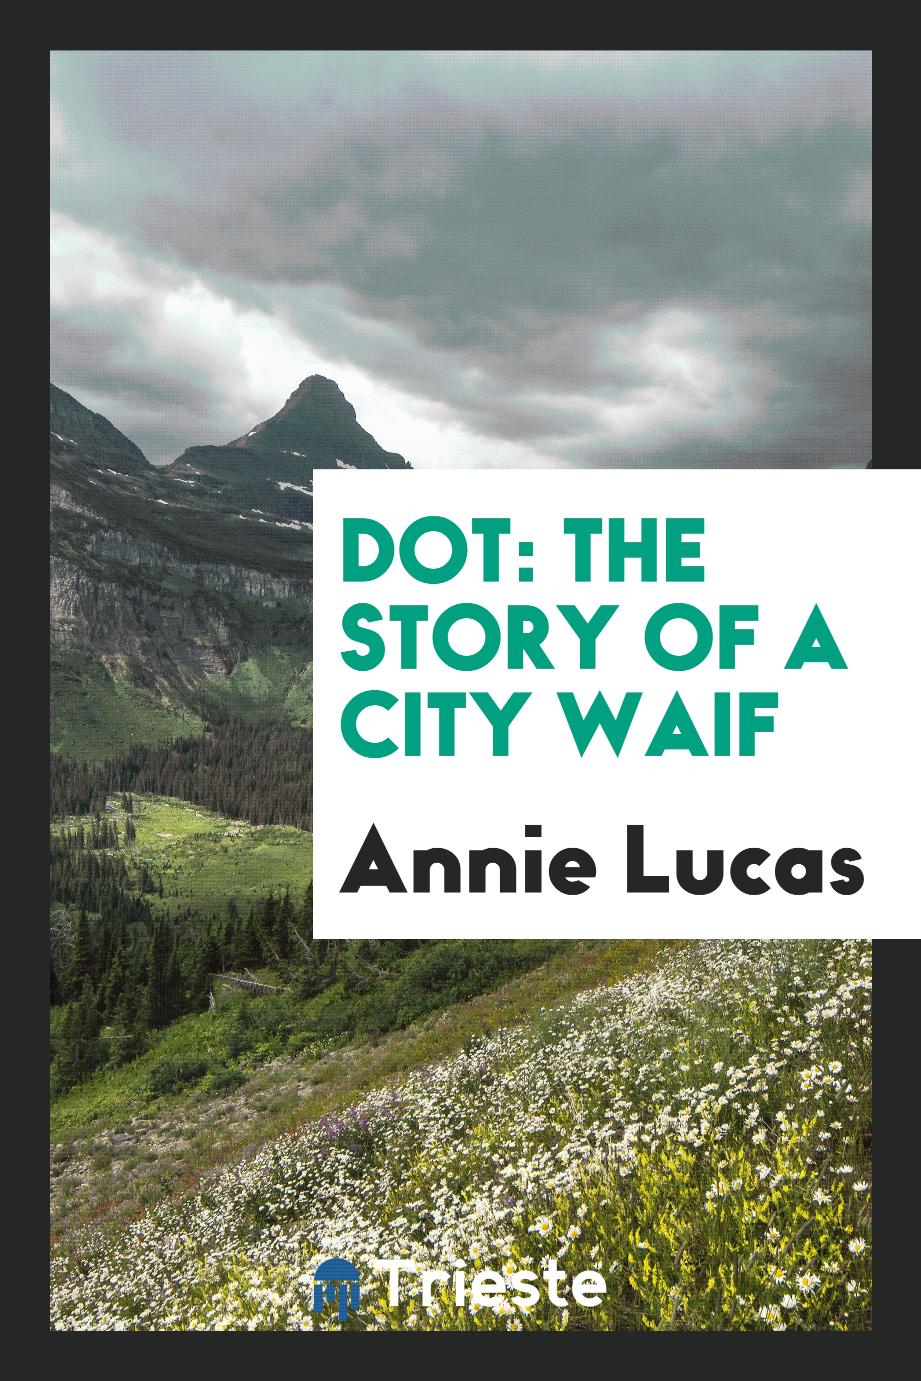 Dot: the story of a city waif